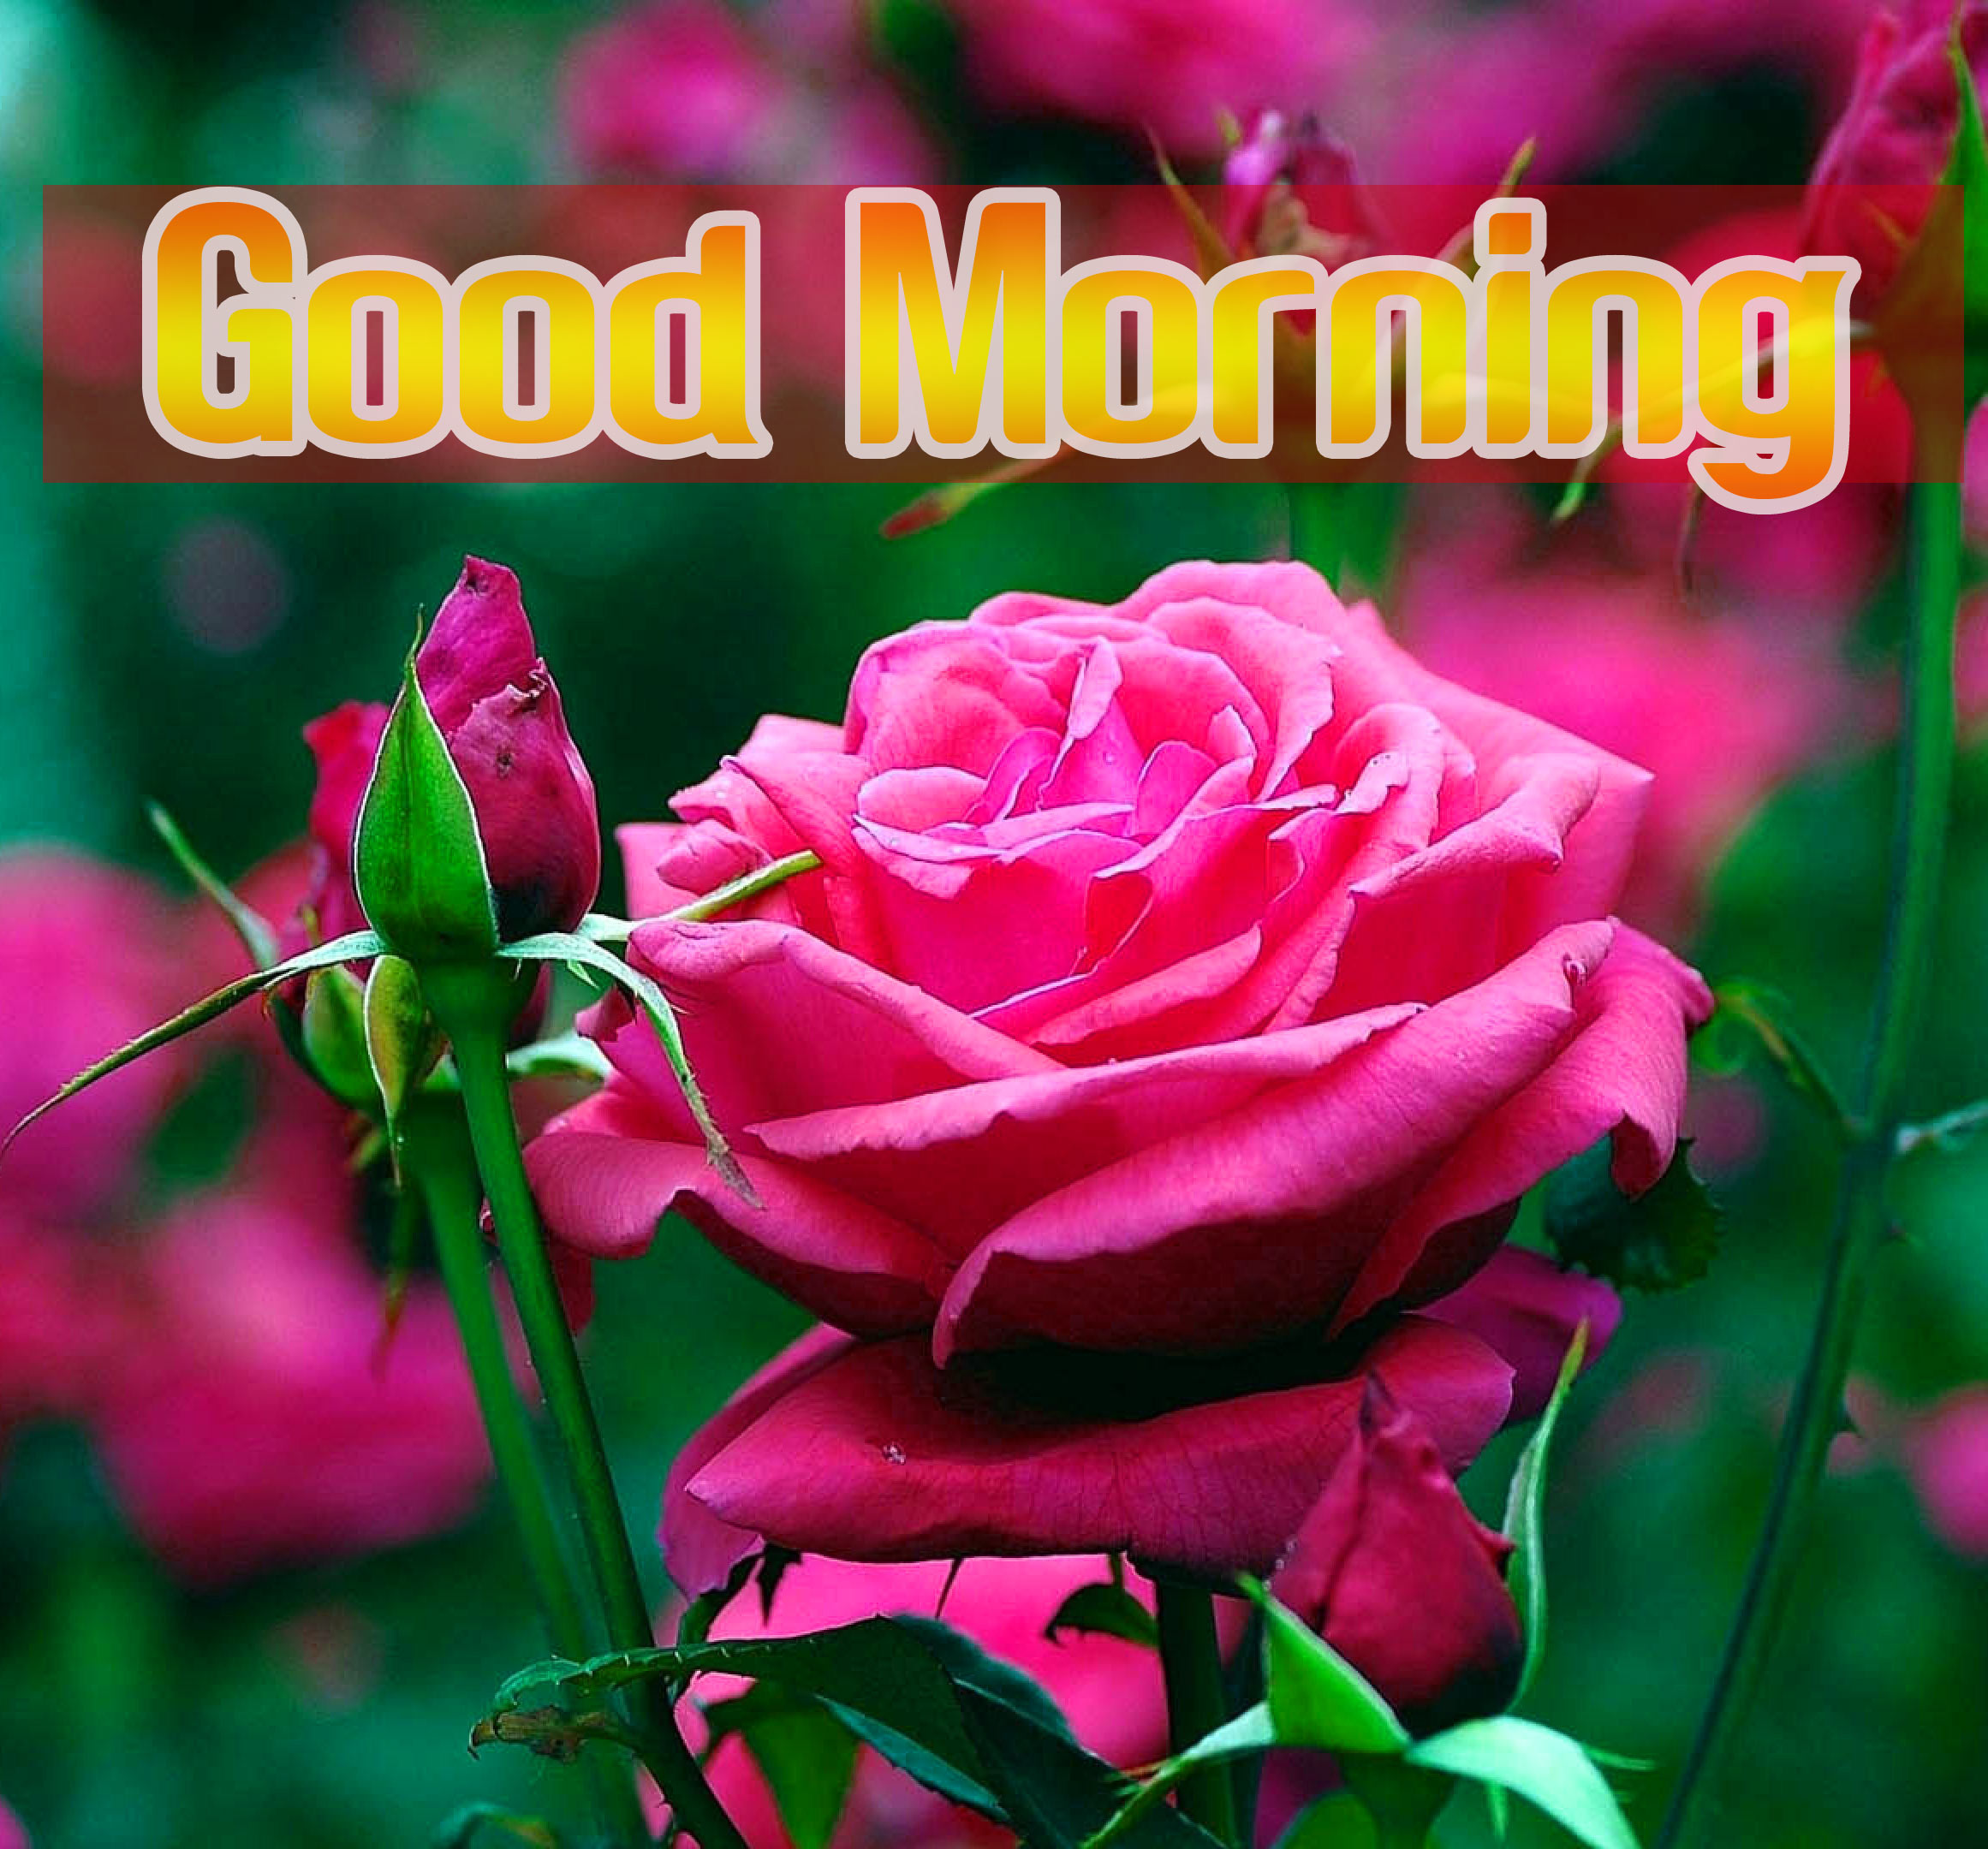 Flower Good morning  Images Pics Free For Facebook